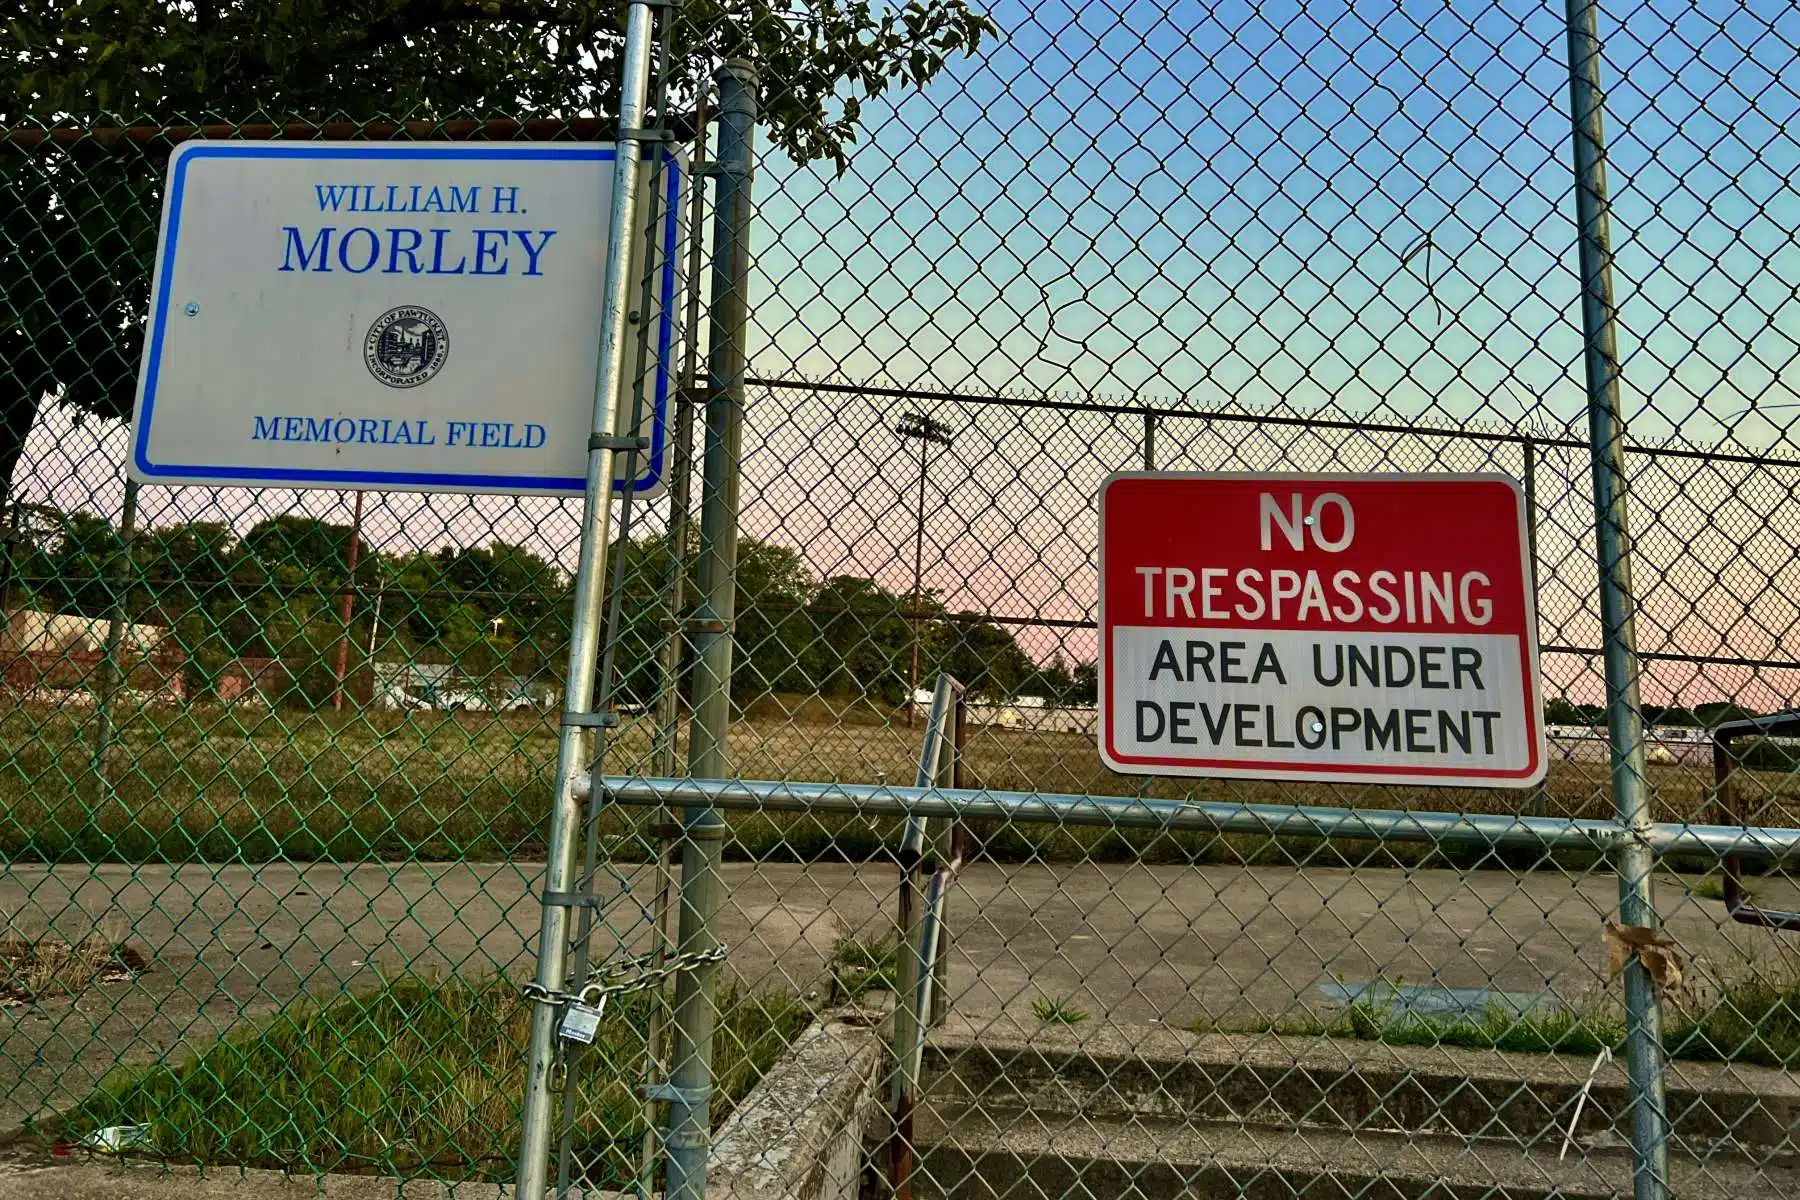 Protected: New data calls into question the soil testing done at Morley Field by the developer, JK Equity